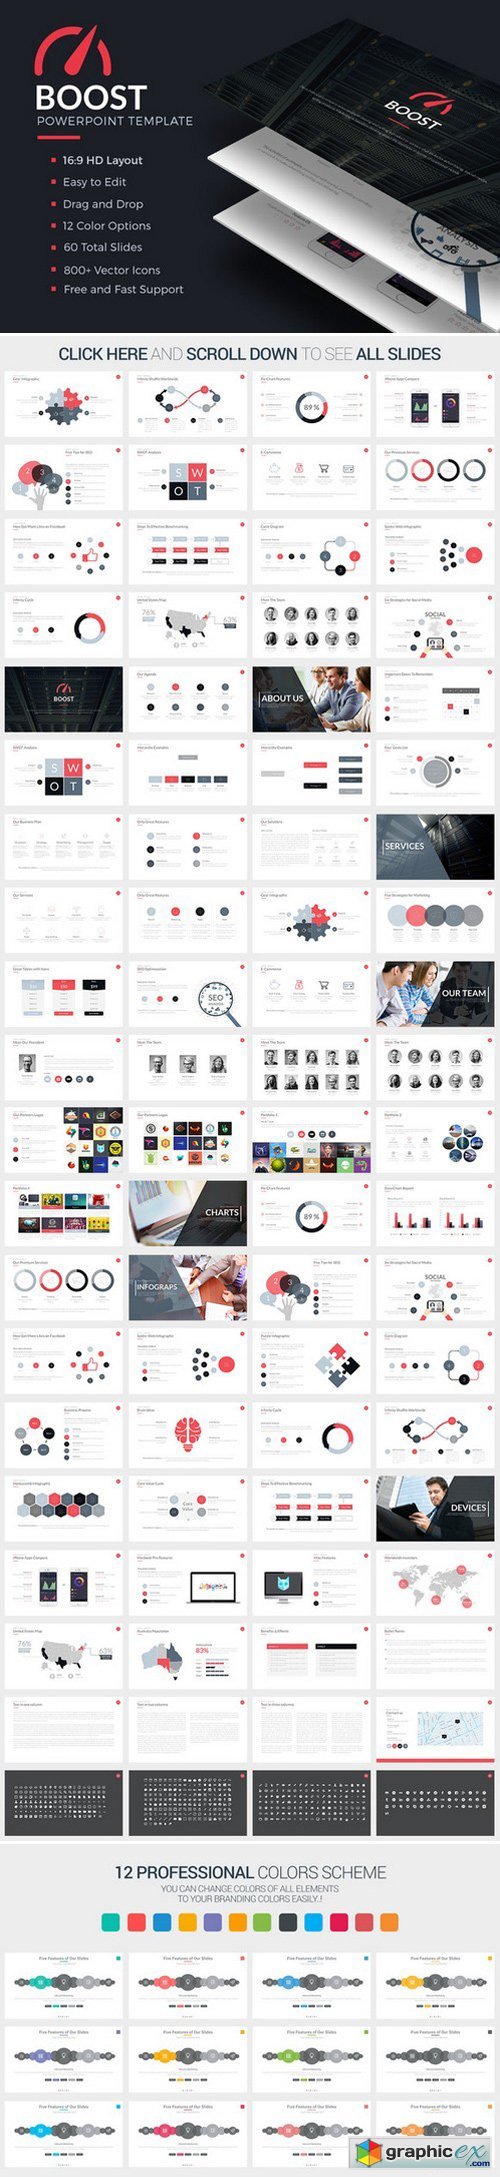 Boost Powerpoint Template